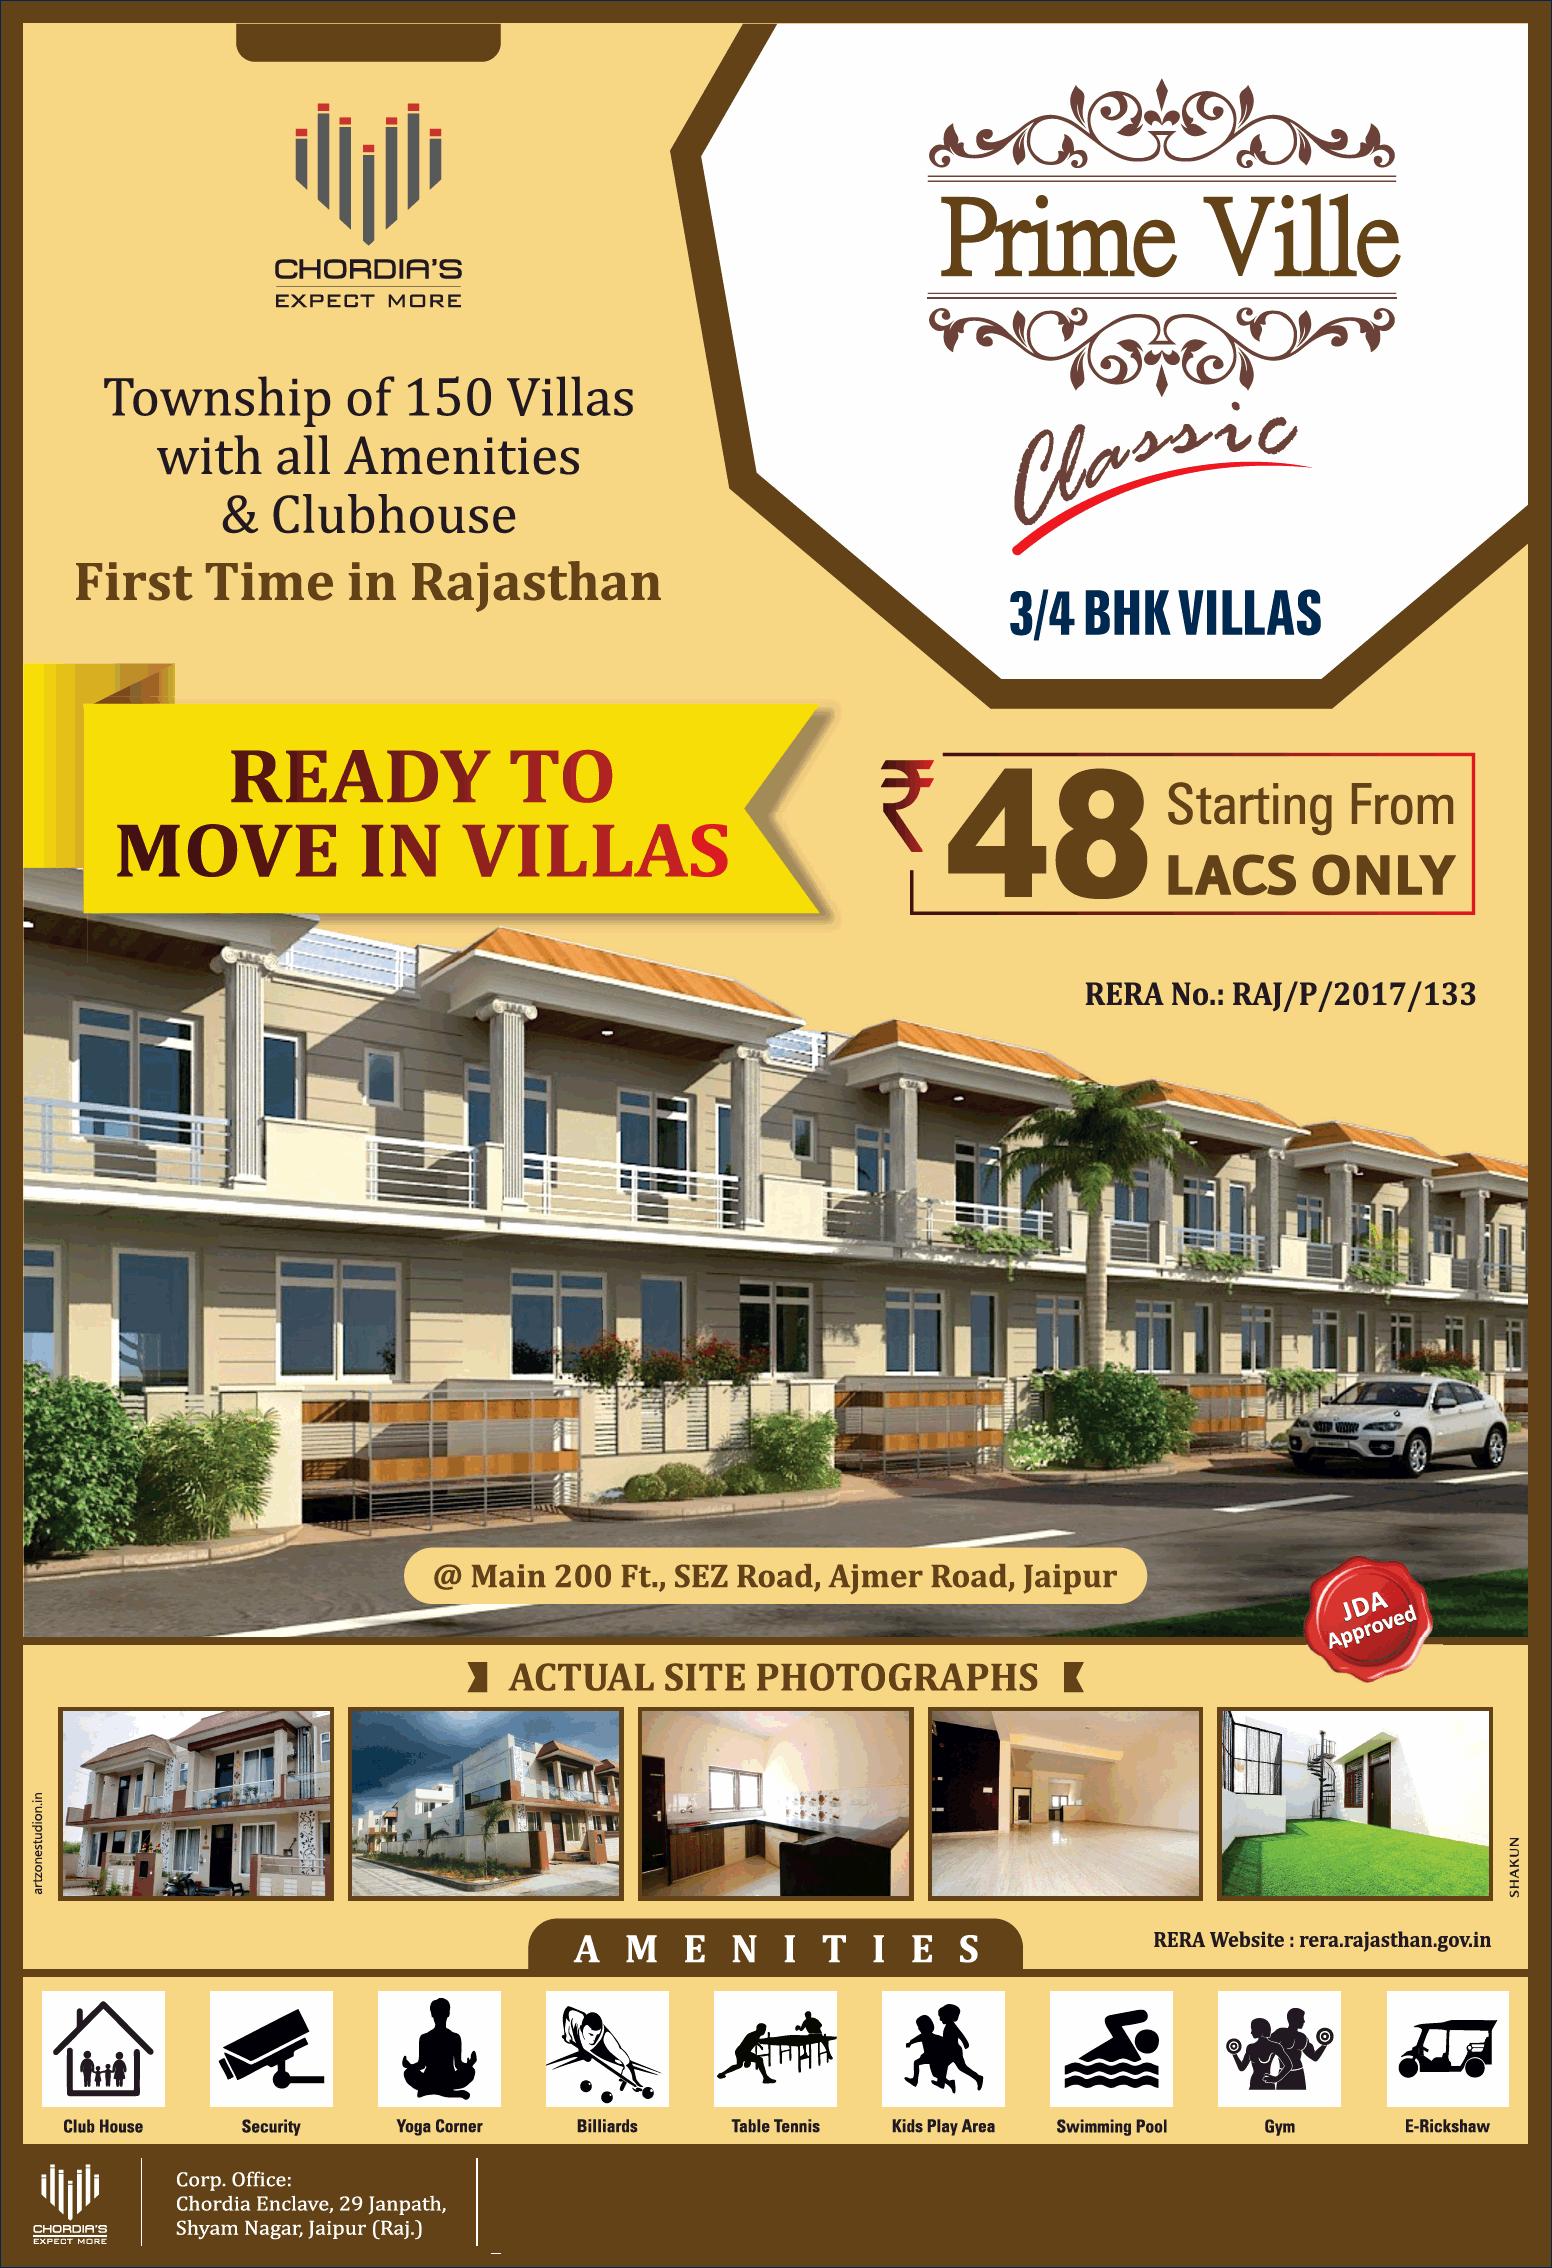 Ready to move in villas at Chordias Prime Ville, Jaipur Update